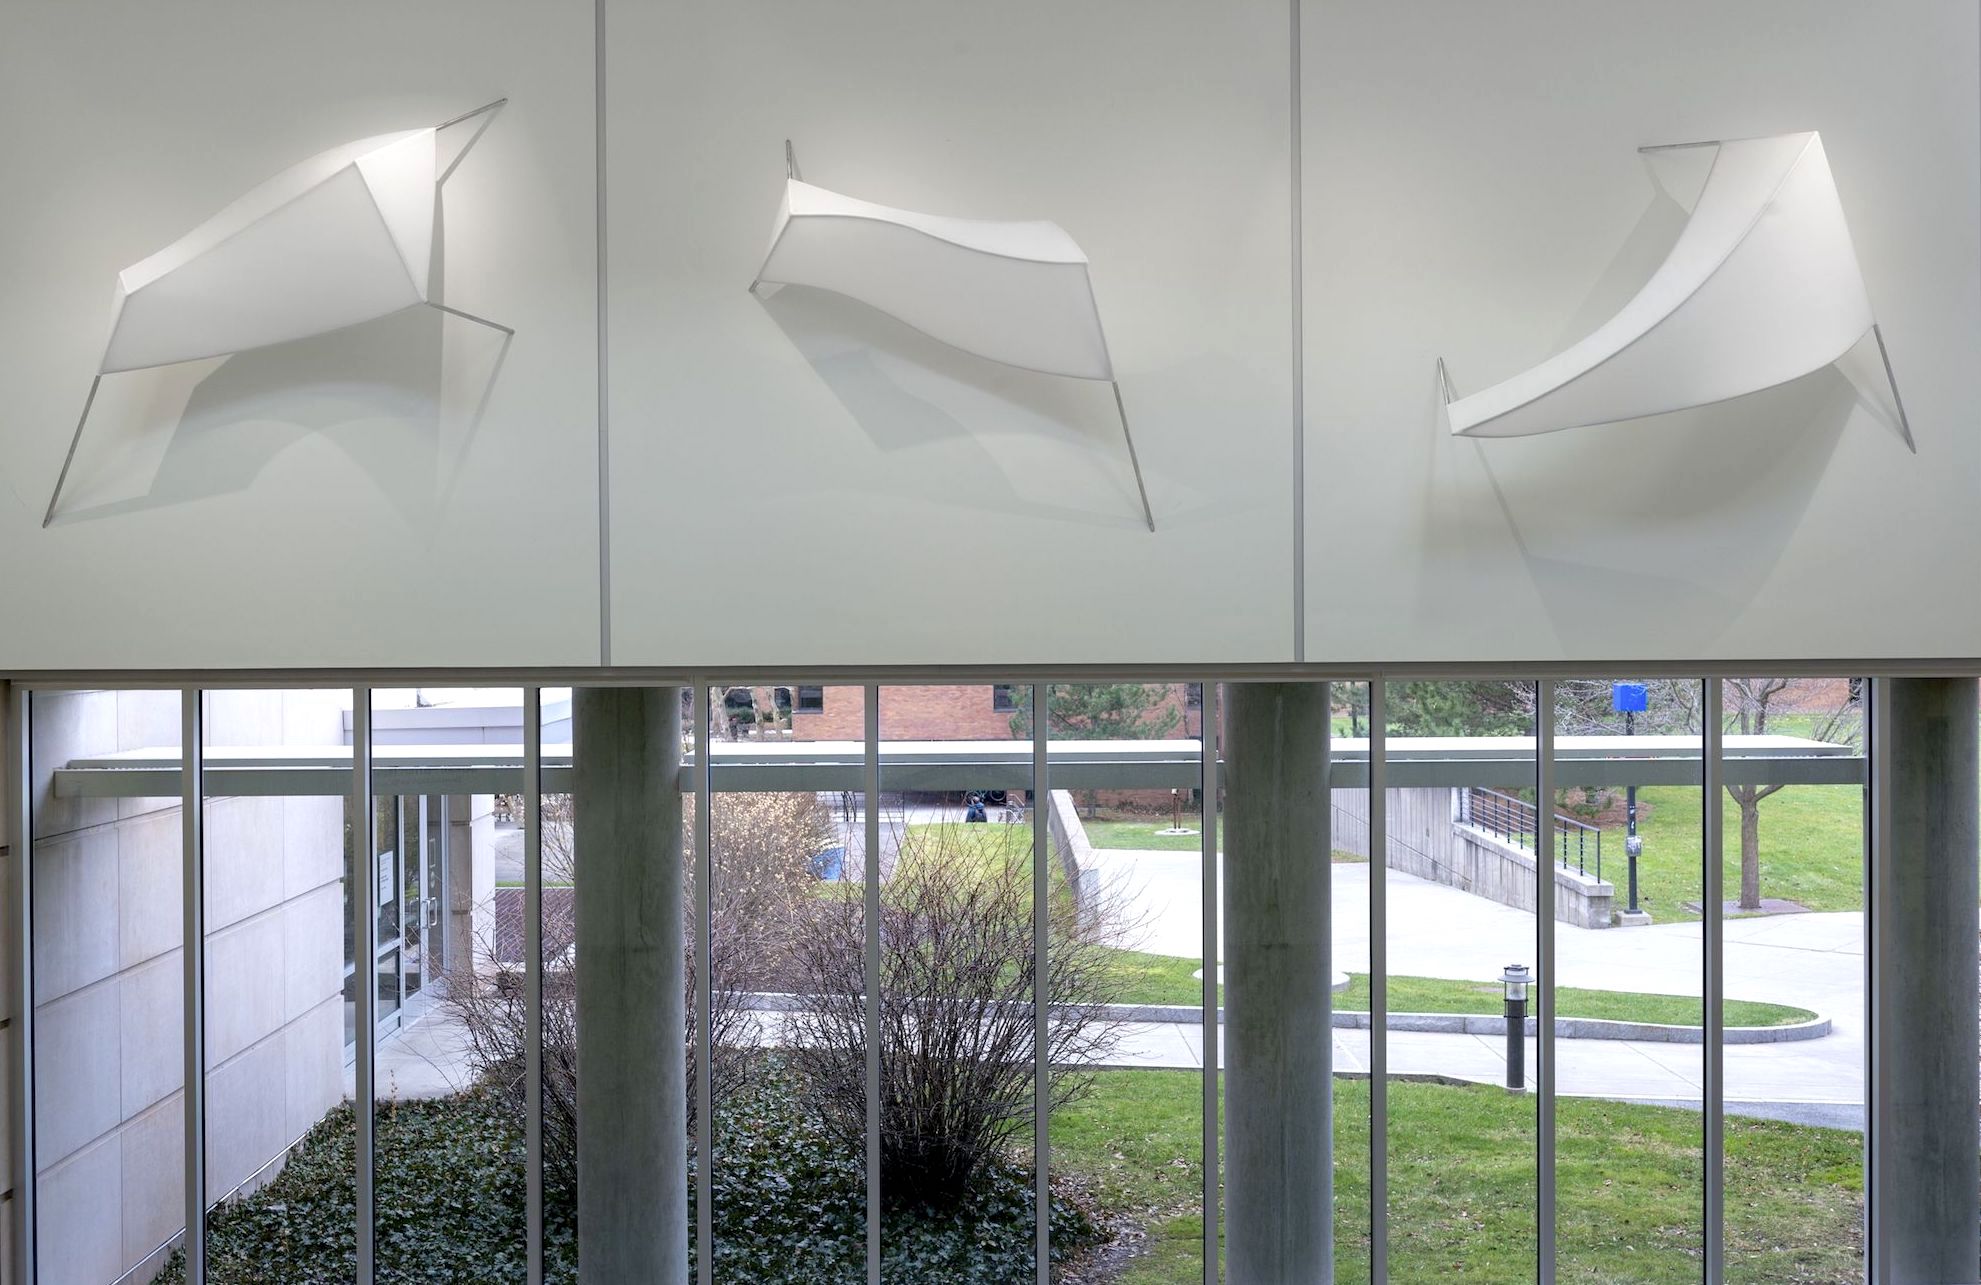 Installation of three sculptural forms made of white fabric stretched over a 3D armature and mounted on the wall.